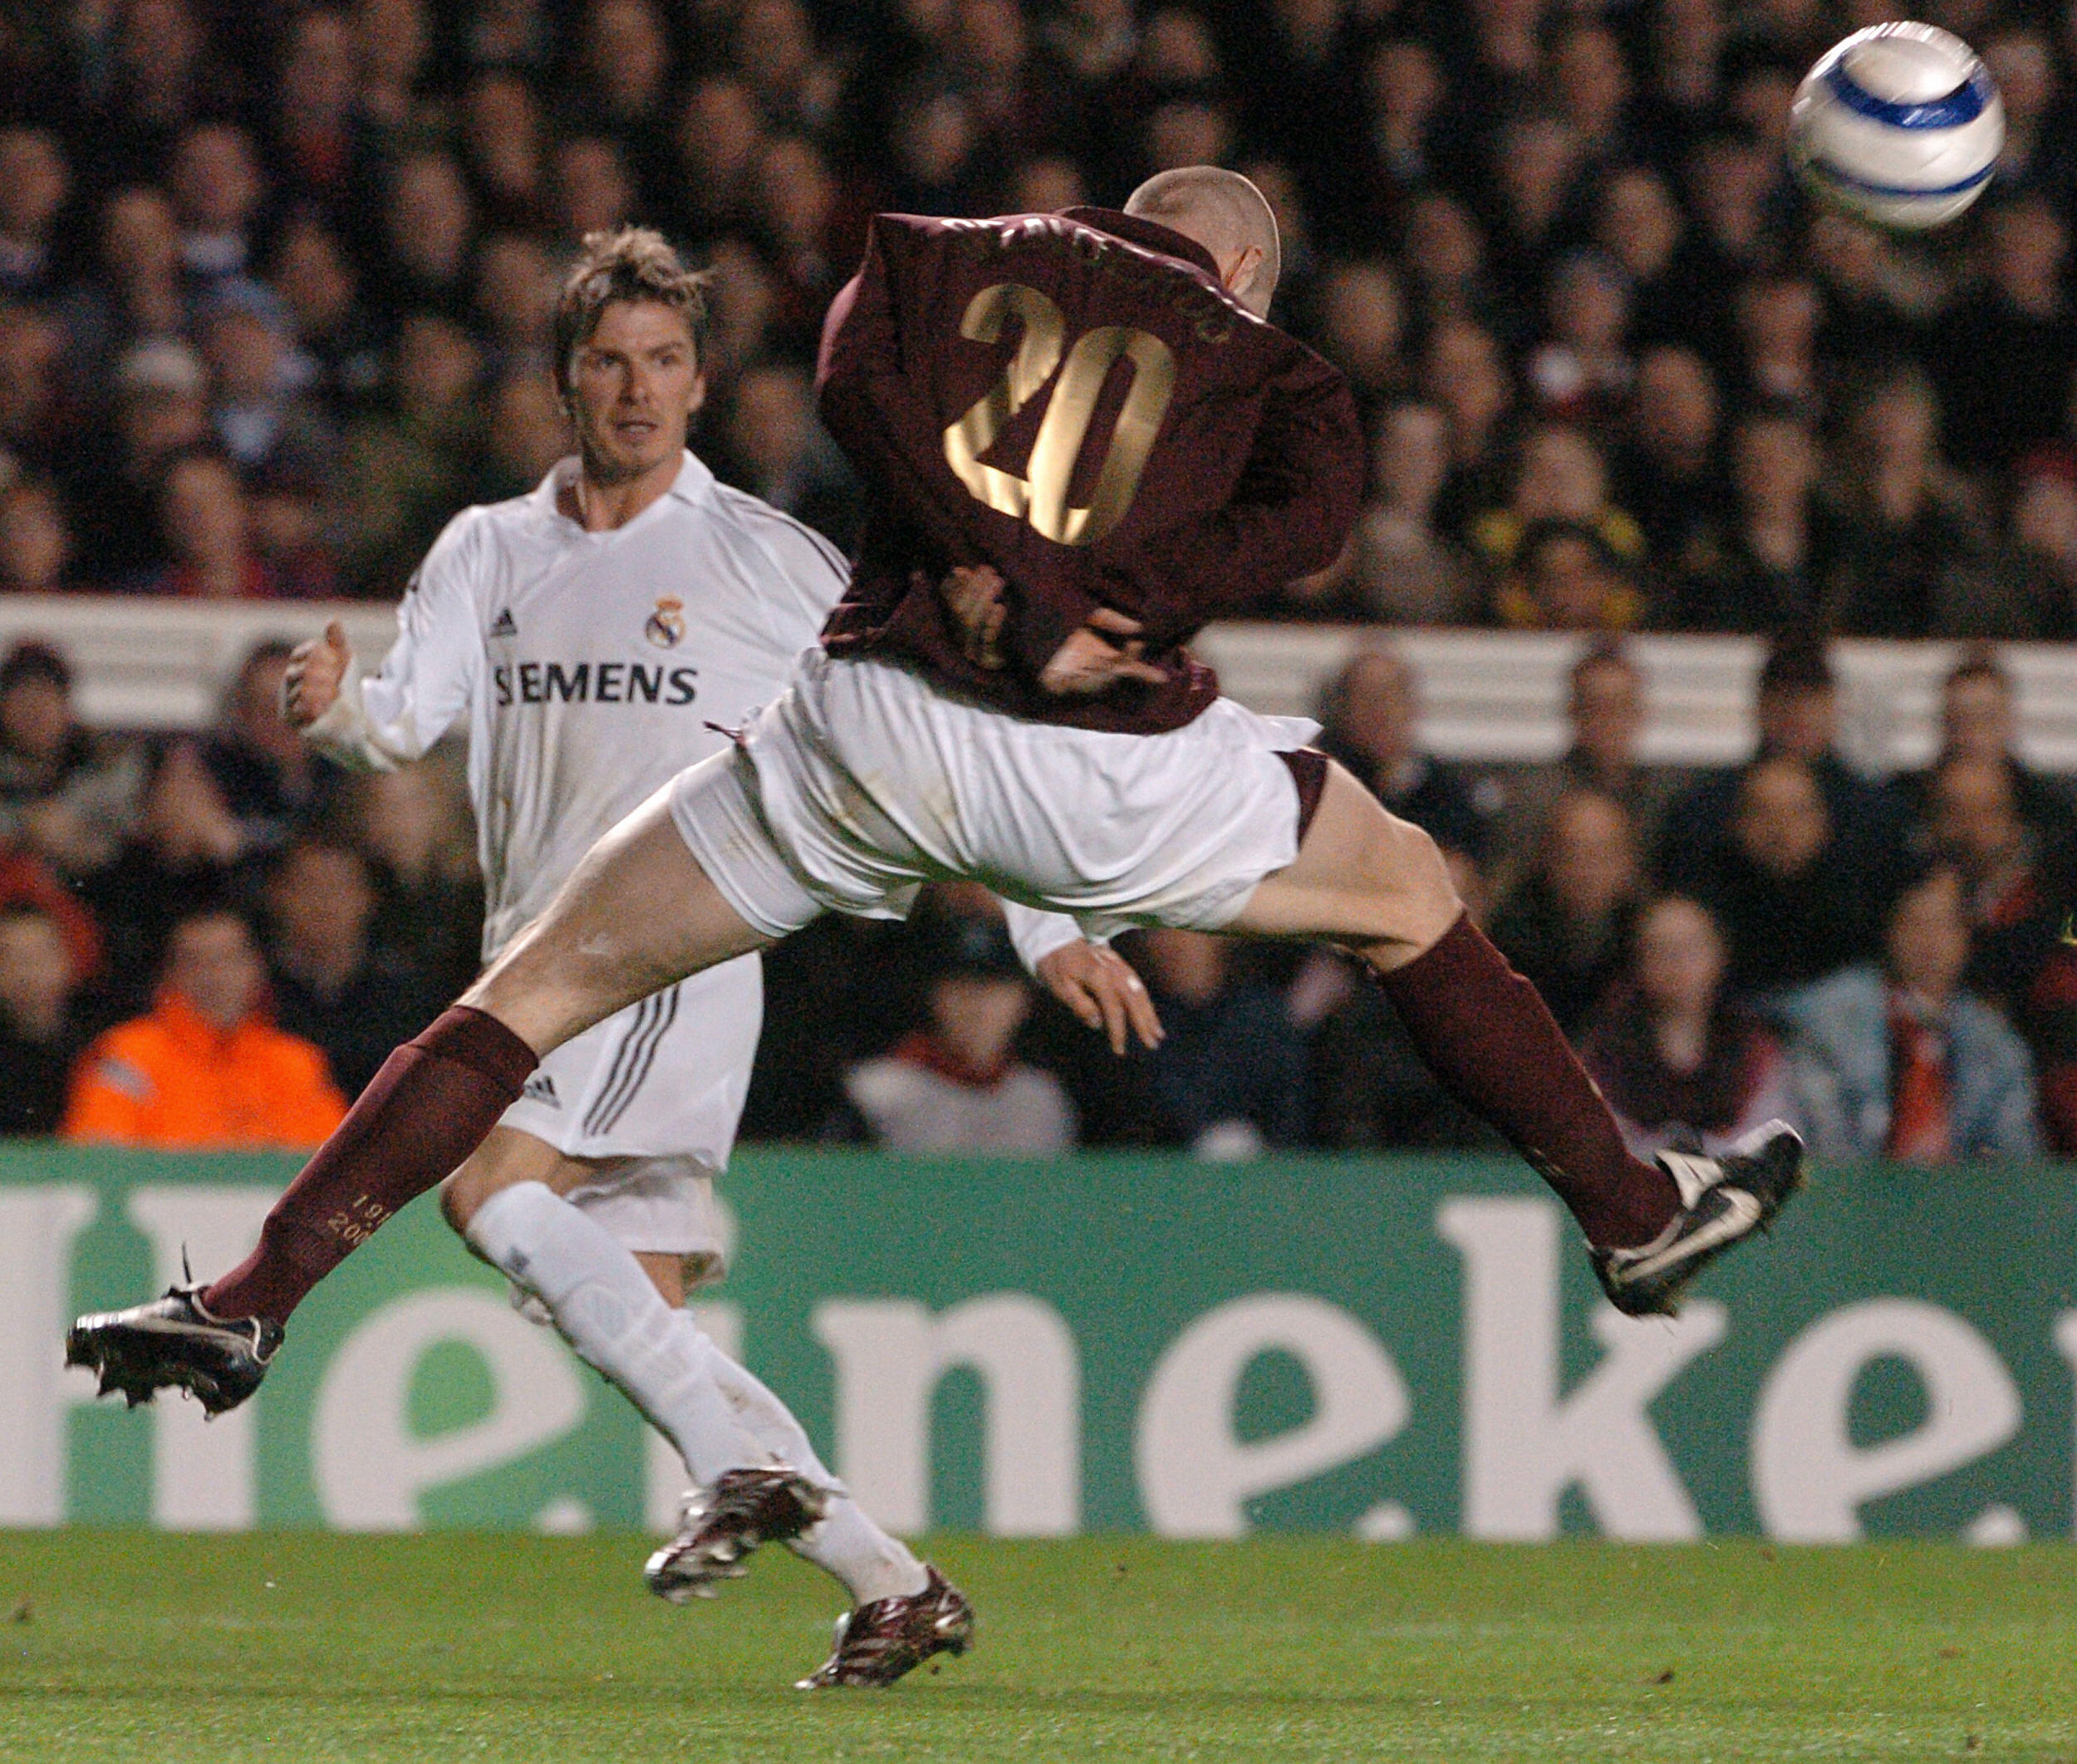 Senderos failed to concede a goal in all seven of his Champions League appearances in the 2005/06 campaign